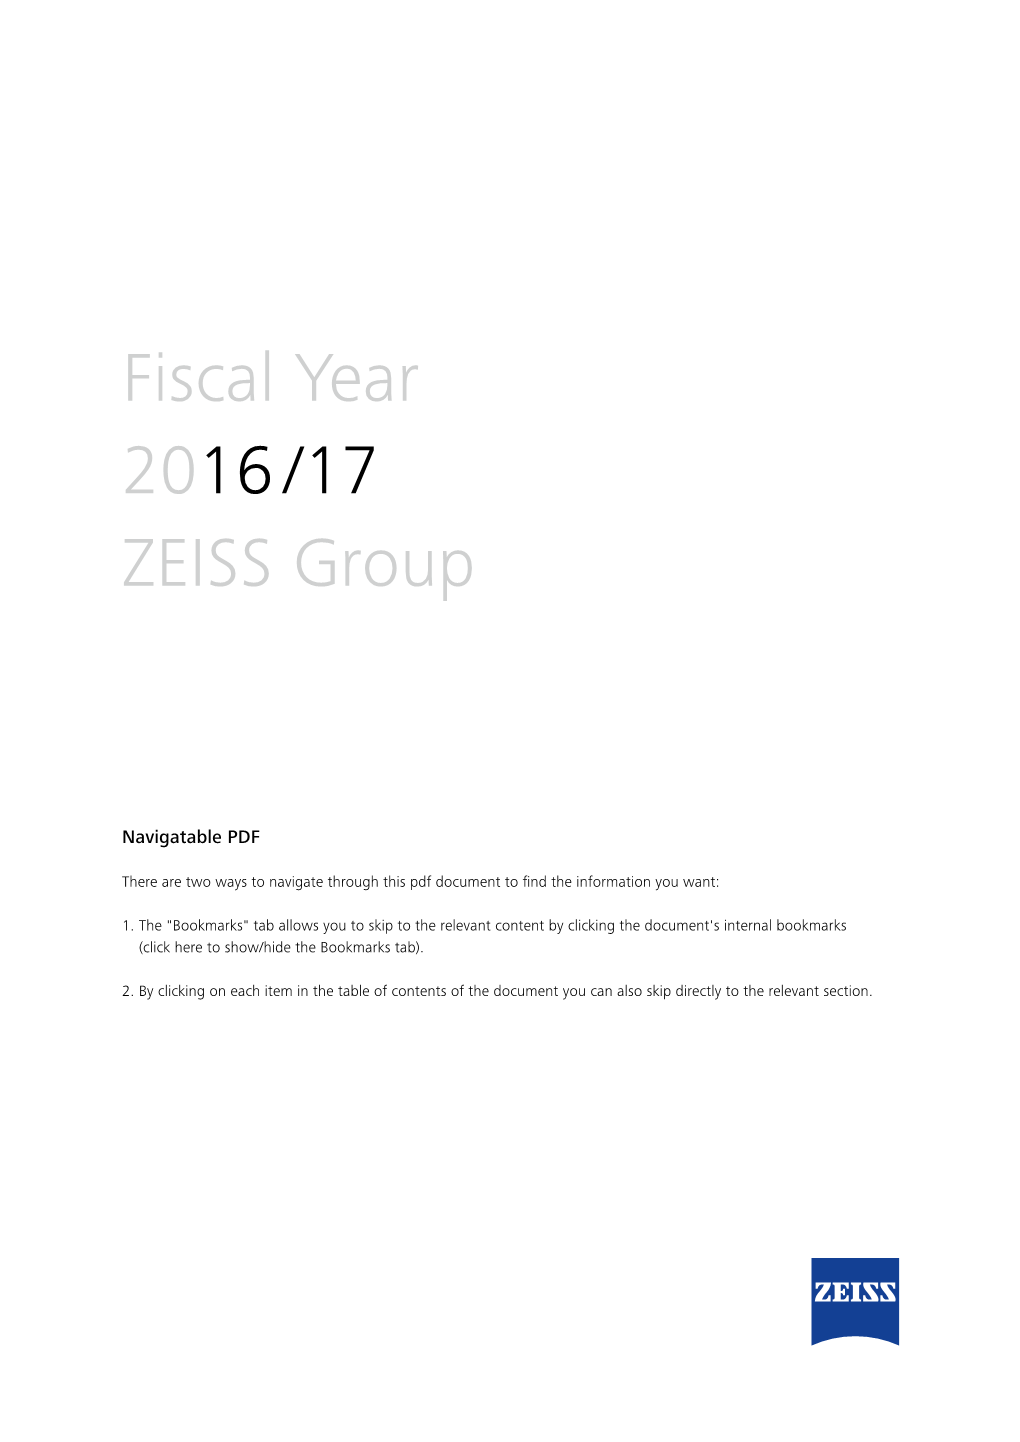 Fiscal Year 2016 /17 ZEISS Group Financial Highlights (Ifrss)